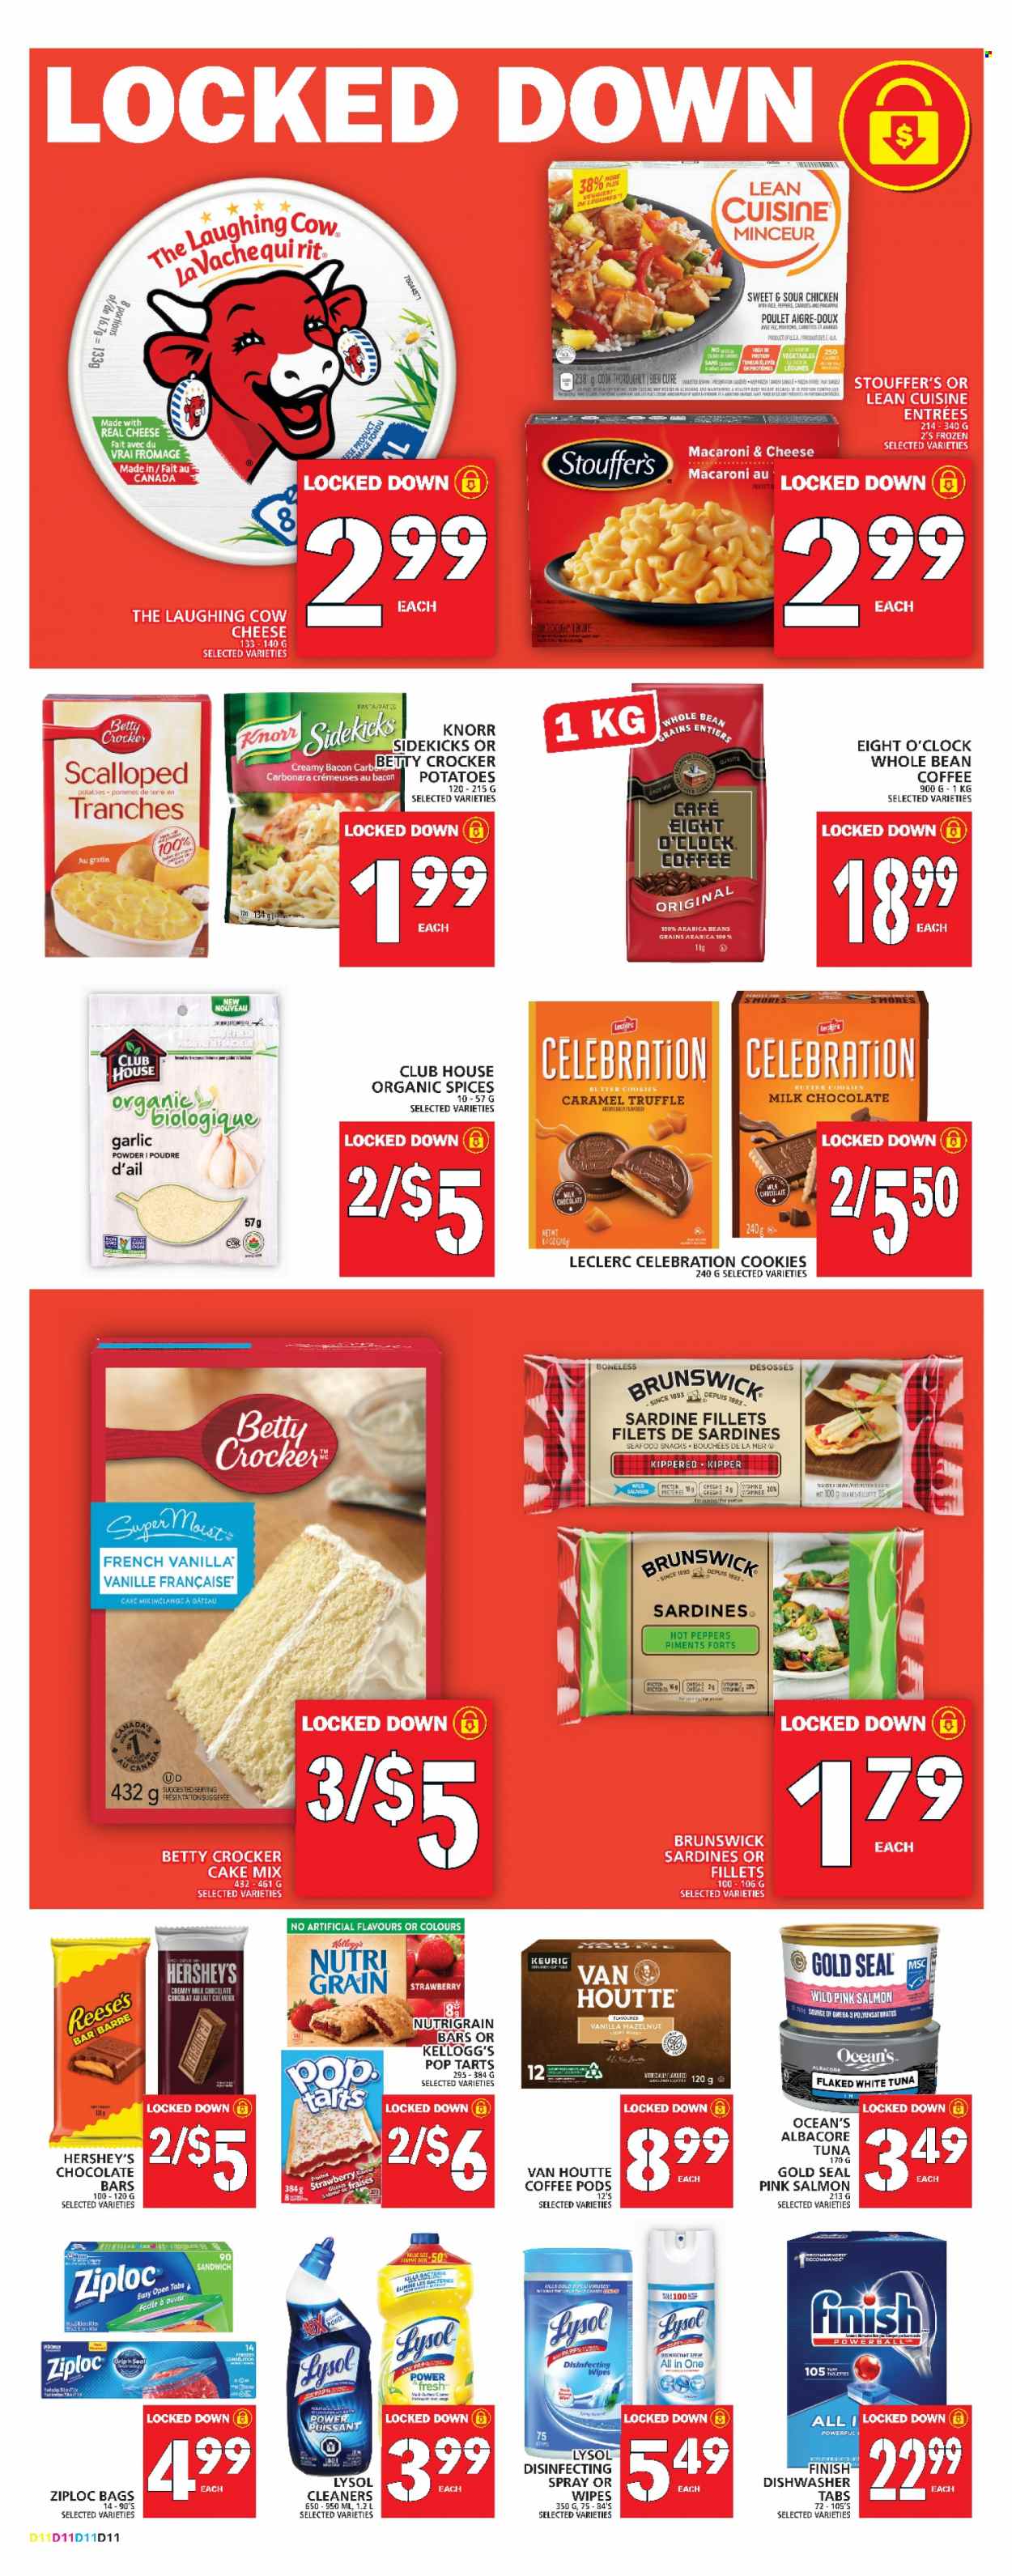 thumbnail - Food Basics Flyer - February 09, 2023 - February 15, 2023 - Sales products - cake mix, peppers, salmon, sardines, tuna, seafood, macaroni & cheese, sandwich, Lean Cuisine, bacon, The Laughing Cow, Reese's, Hershey's, Stouffer's, cookies, milk chocolate, snack, truffles, Celebration, Kellogg's, Pop-Tarts, Nutri-Grain bars, chocolate bar, Nutri-Grain, garlic powder, coffee, coffee pods, arabica beans, Eight O'Clock, wipes, Lysol, Ziploc, pin, Knorr. Page 12.